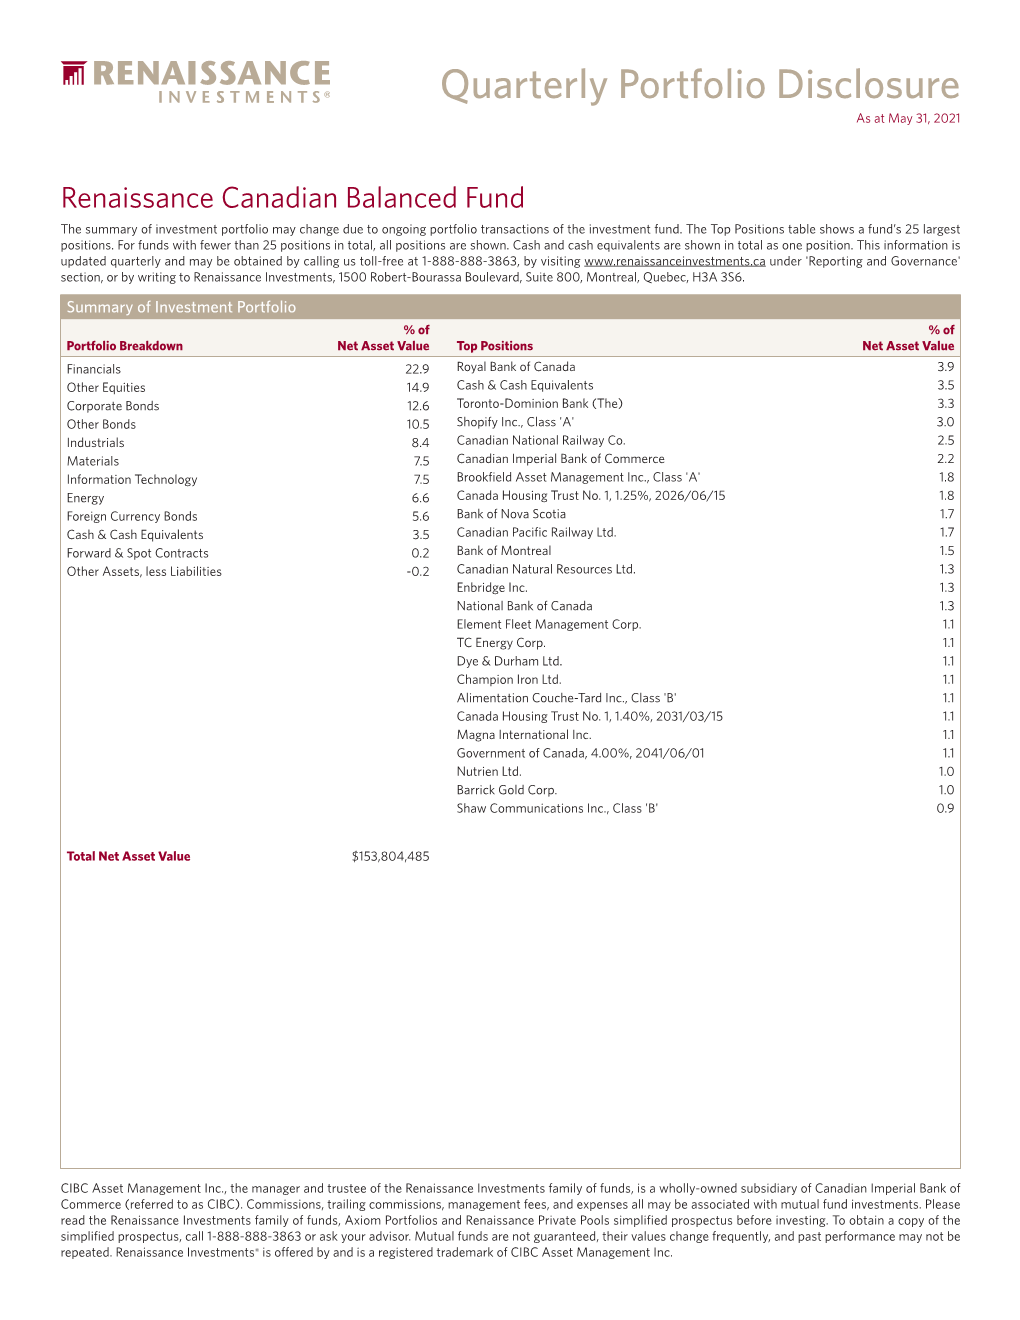 Renaissance Canadian Balanced Fund the Summary of Investment Portfolio May Change Due to Ongoing Portfolio Transactions of the Investment Fund